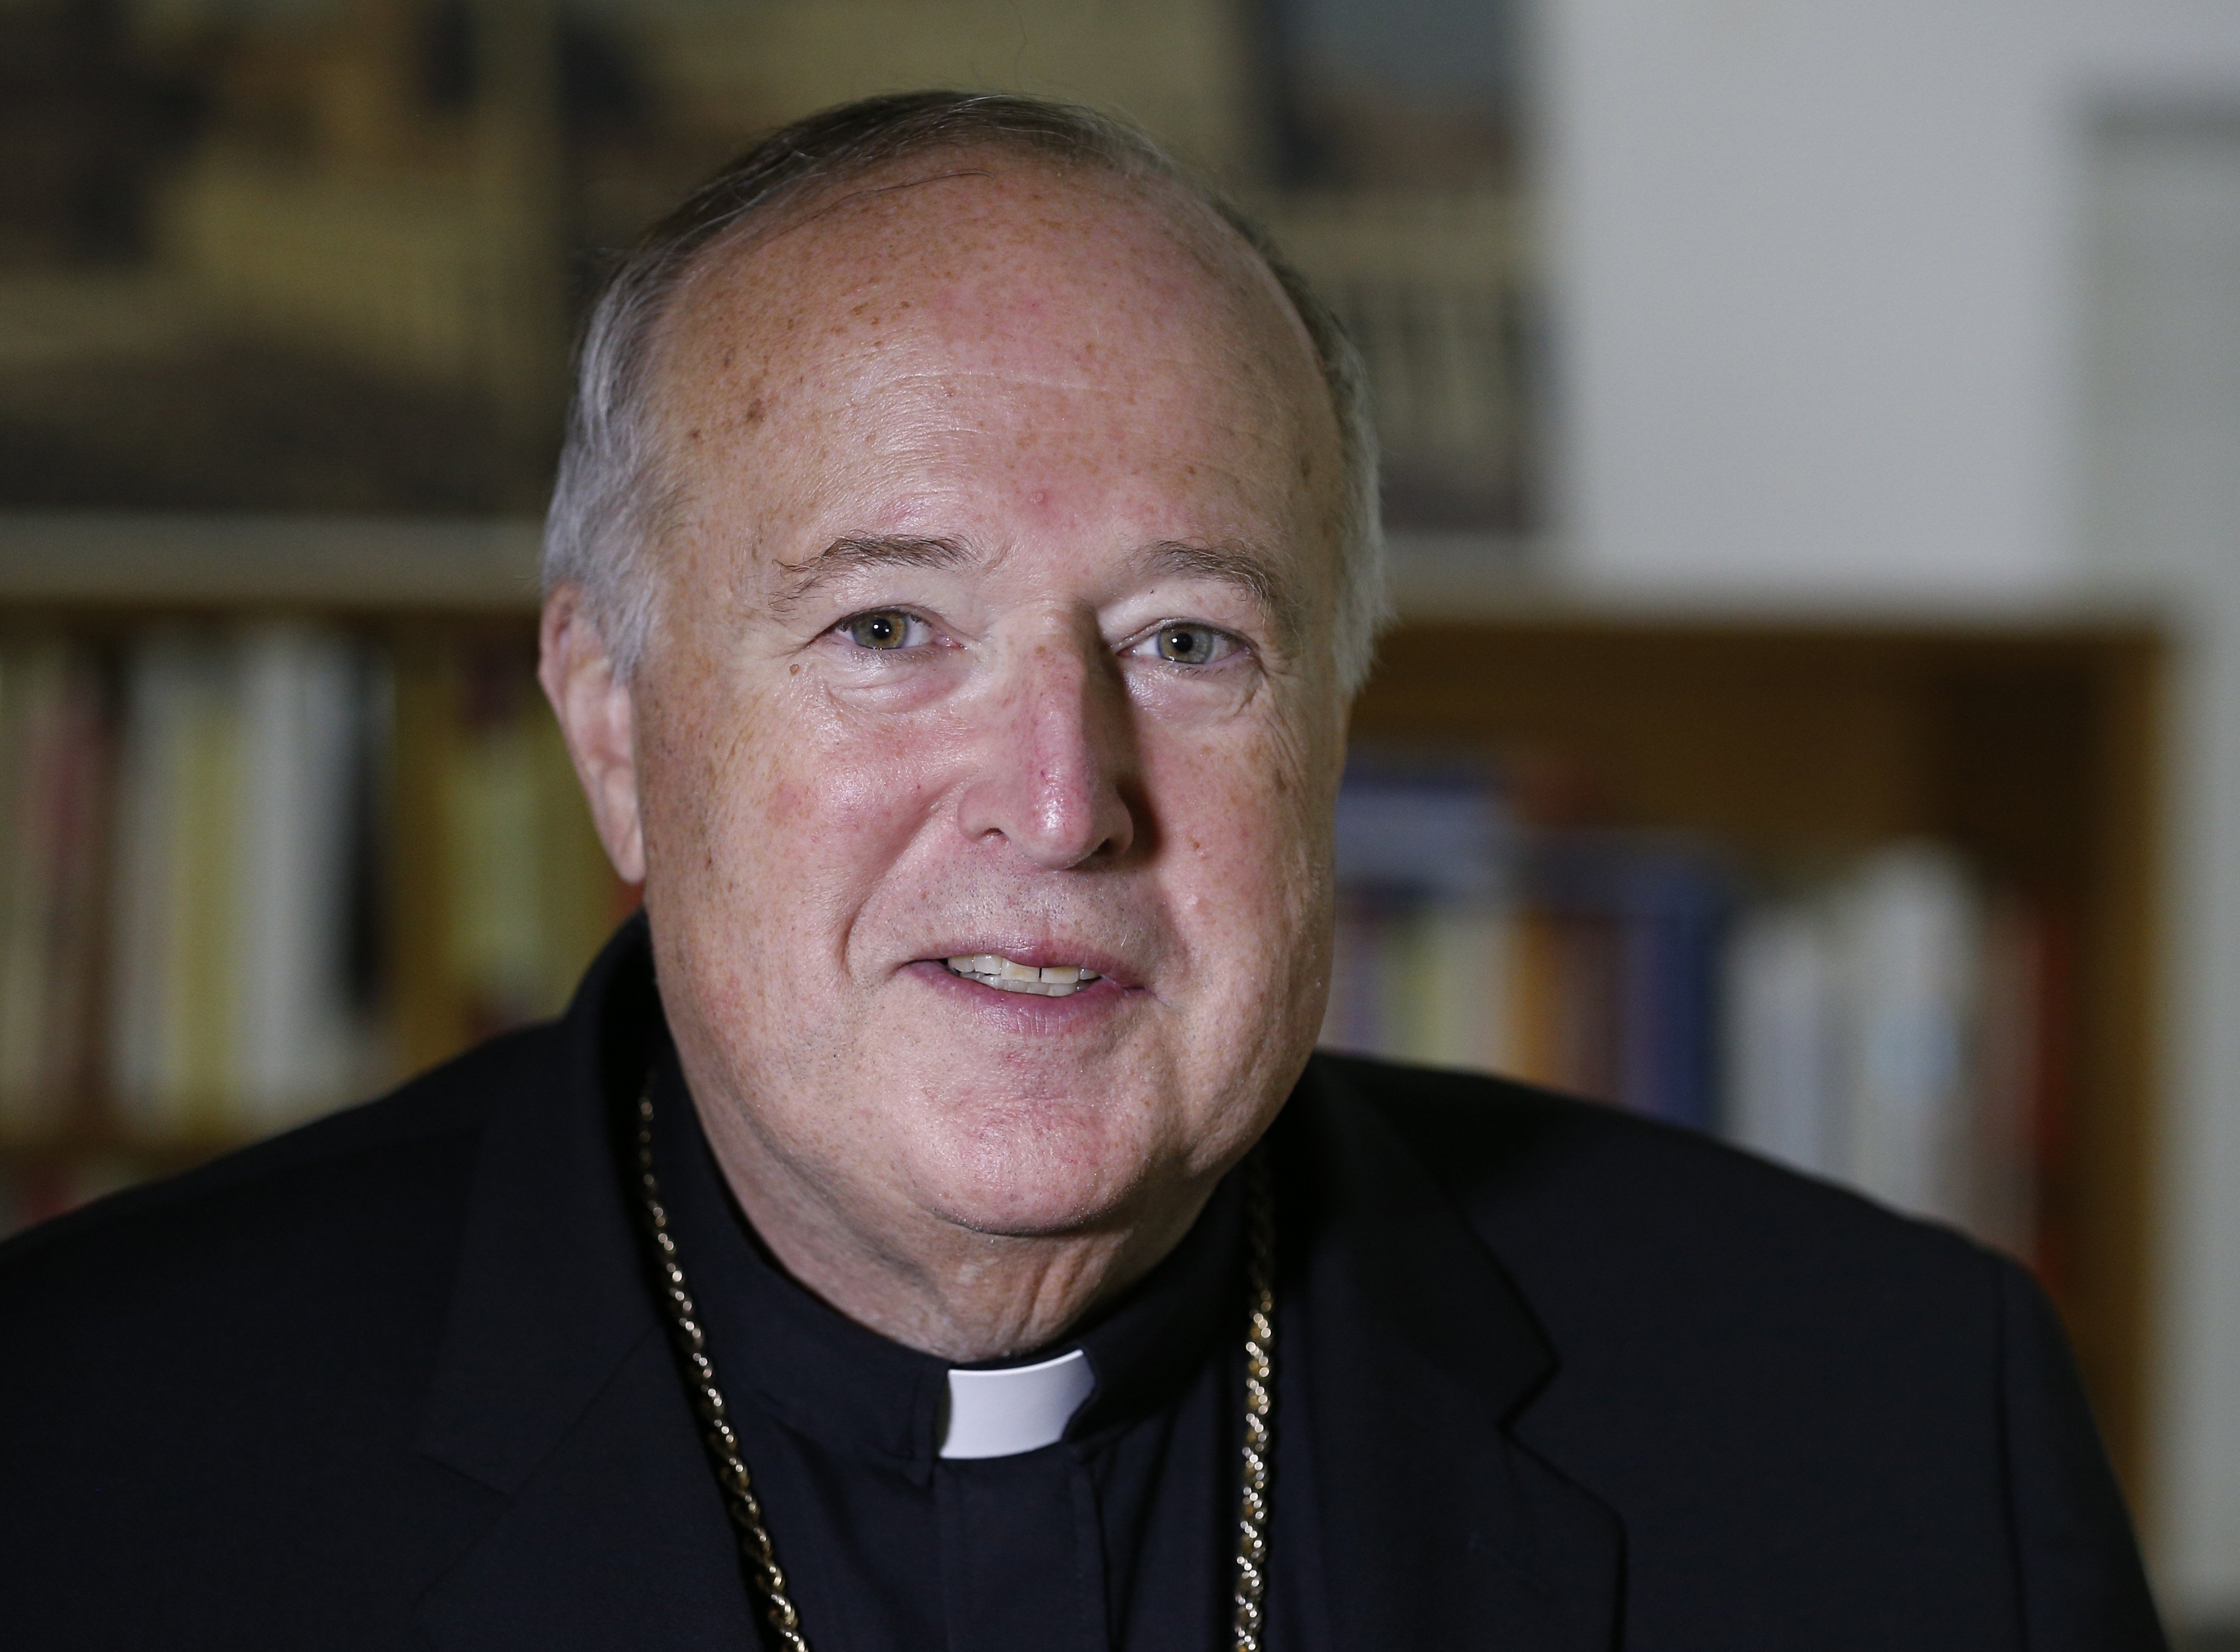 Bishop Robert W. McElroy of San Diego is pictured after an interview with Catholic News Service in Rome Oct. 27, 2019. (CNS photo/Paul Haring)